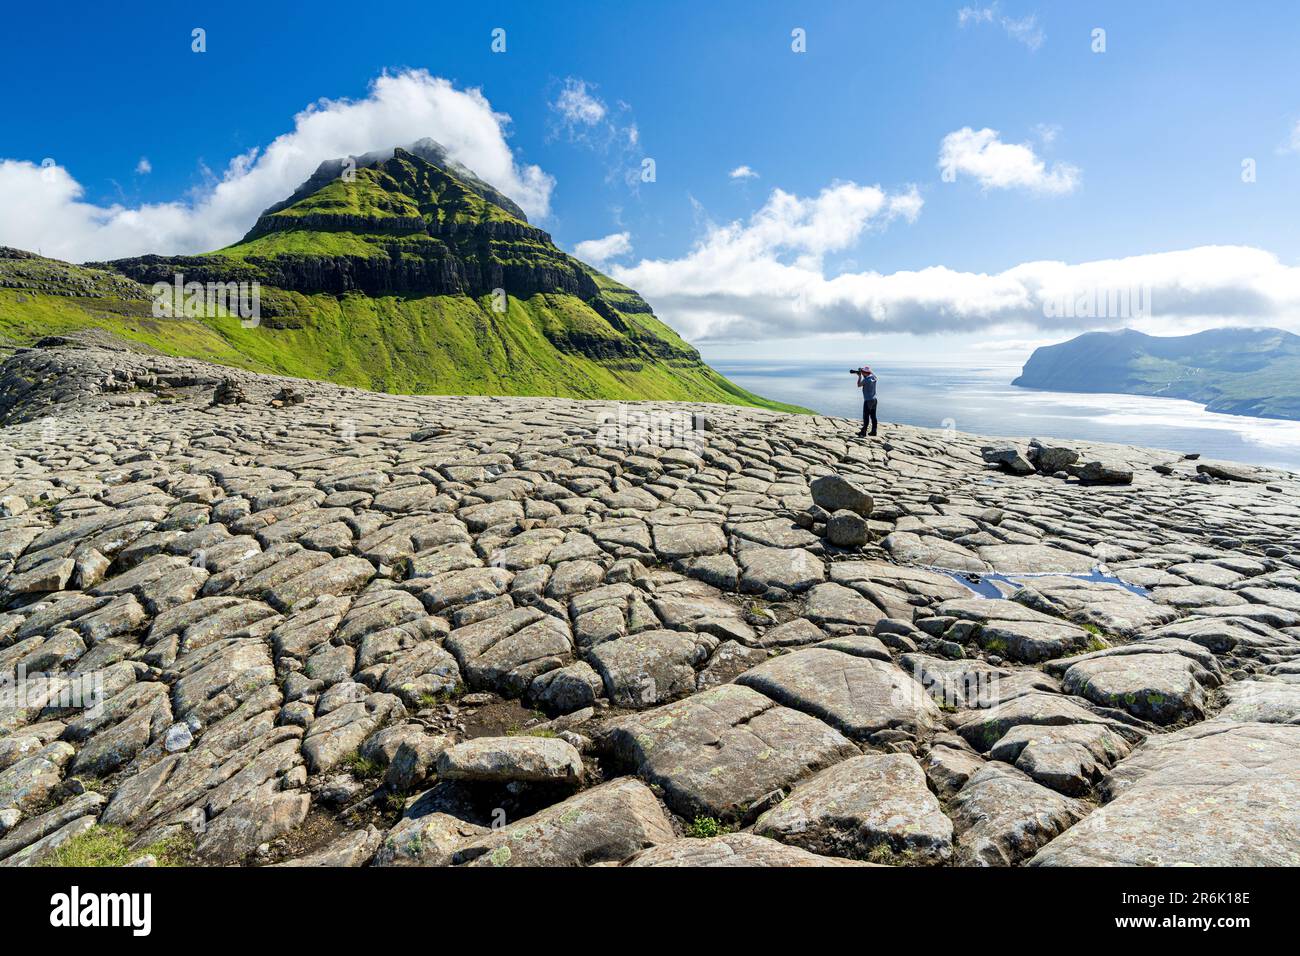 One tourist photographing Skaelingsfjall mountain standing on cracked soil in summer, Streymoy Island, Faroe Islands, Denmark, Europe Stock Photo